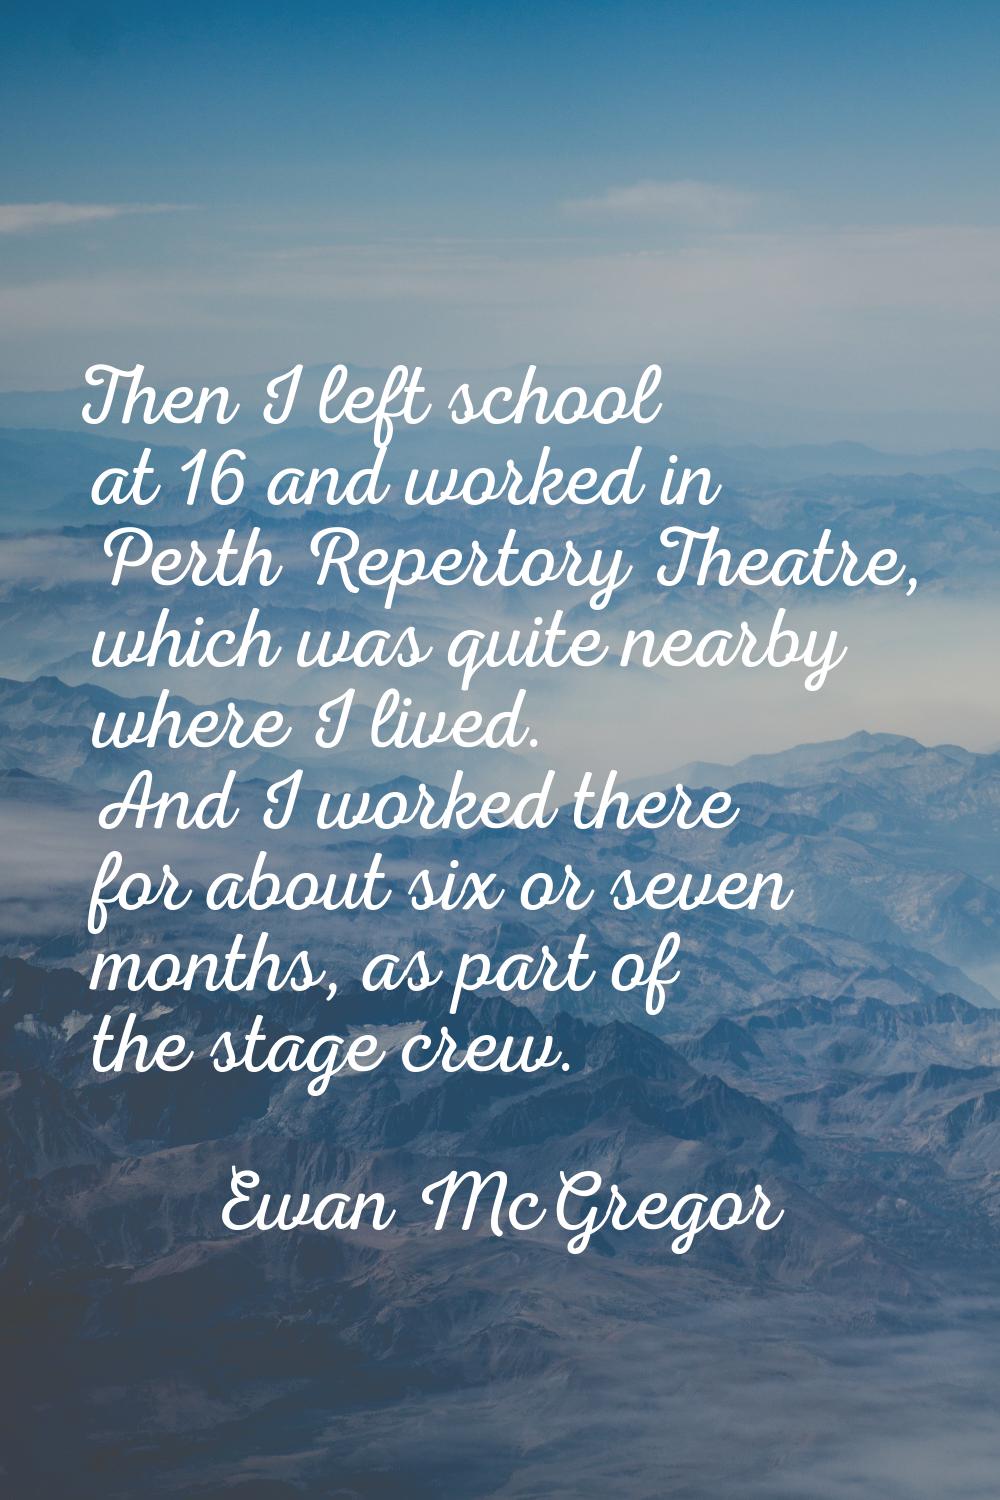 Then I left school at 16 and worked in Perth Repertory Theatre, which was quite nearby where I live